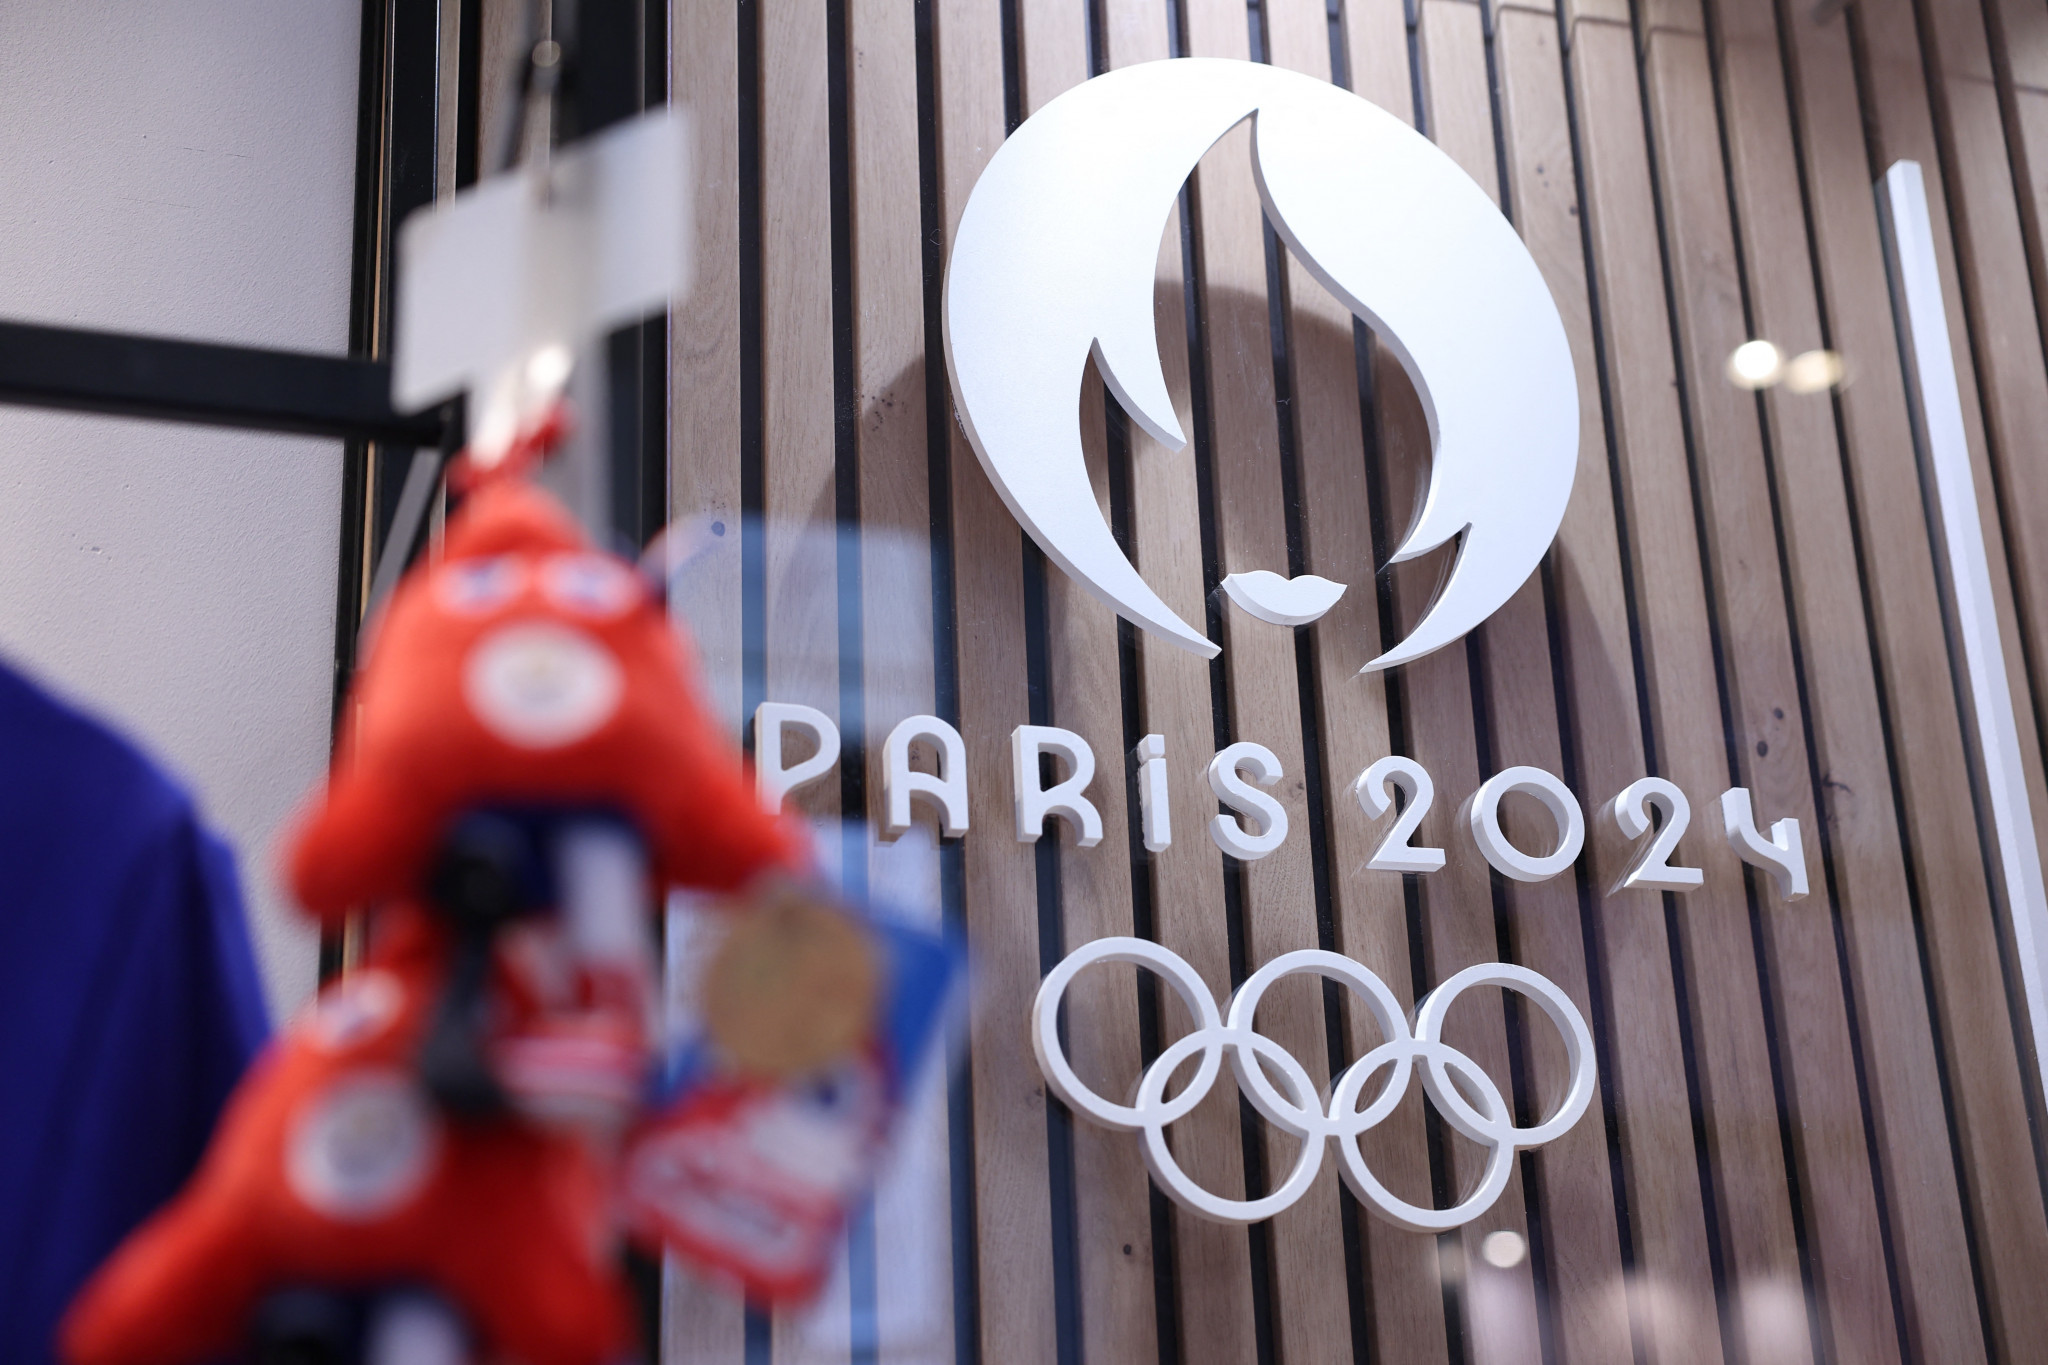 Roger charged with long-term Paris 2024 legacy in Government role